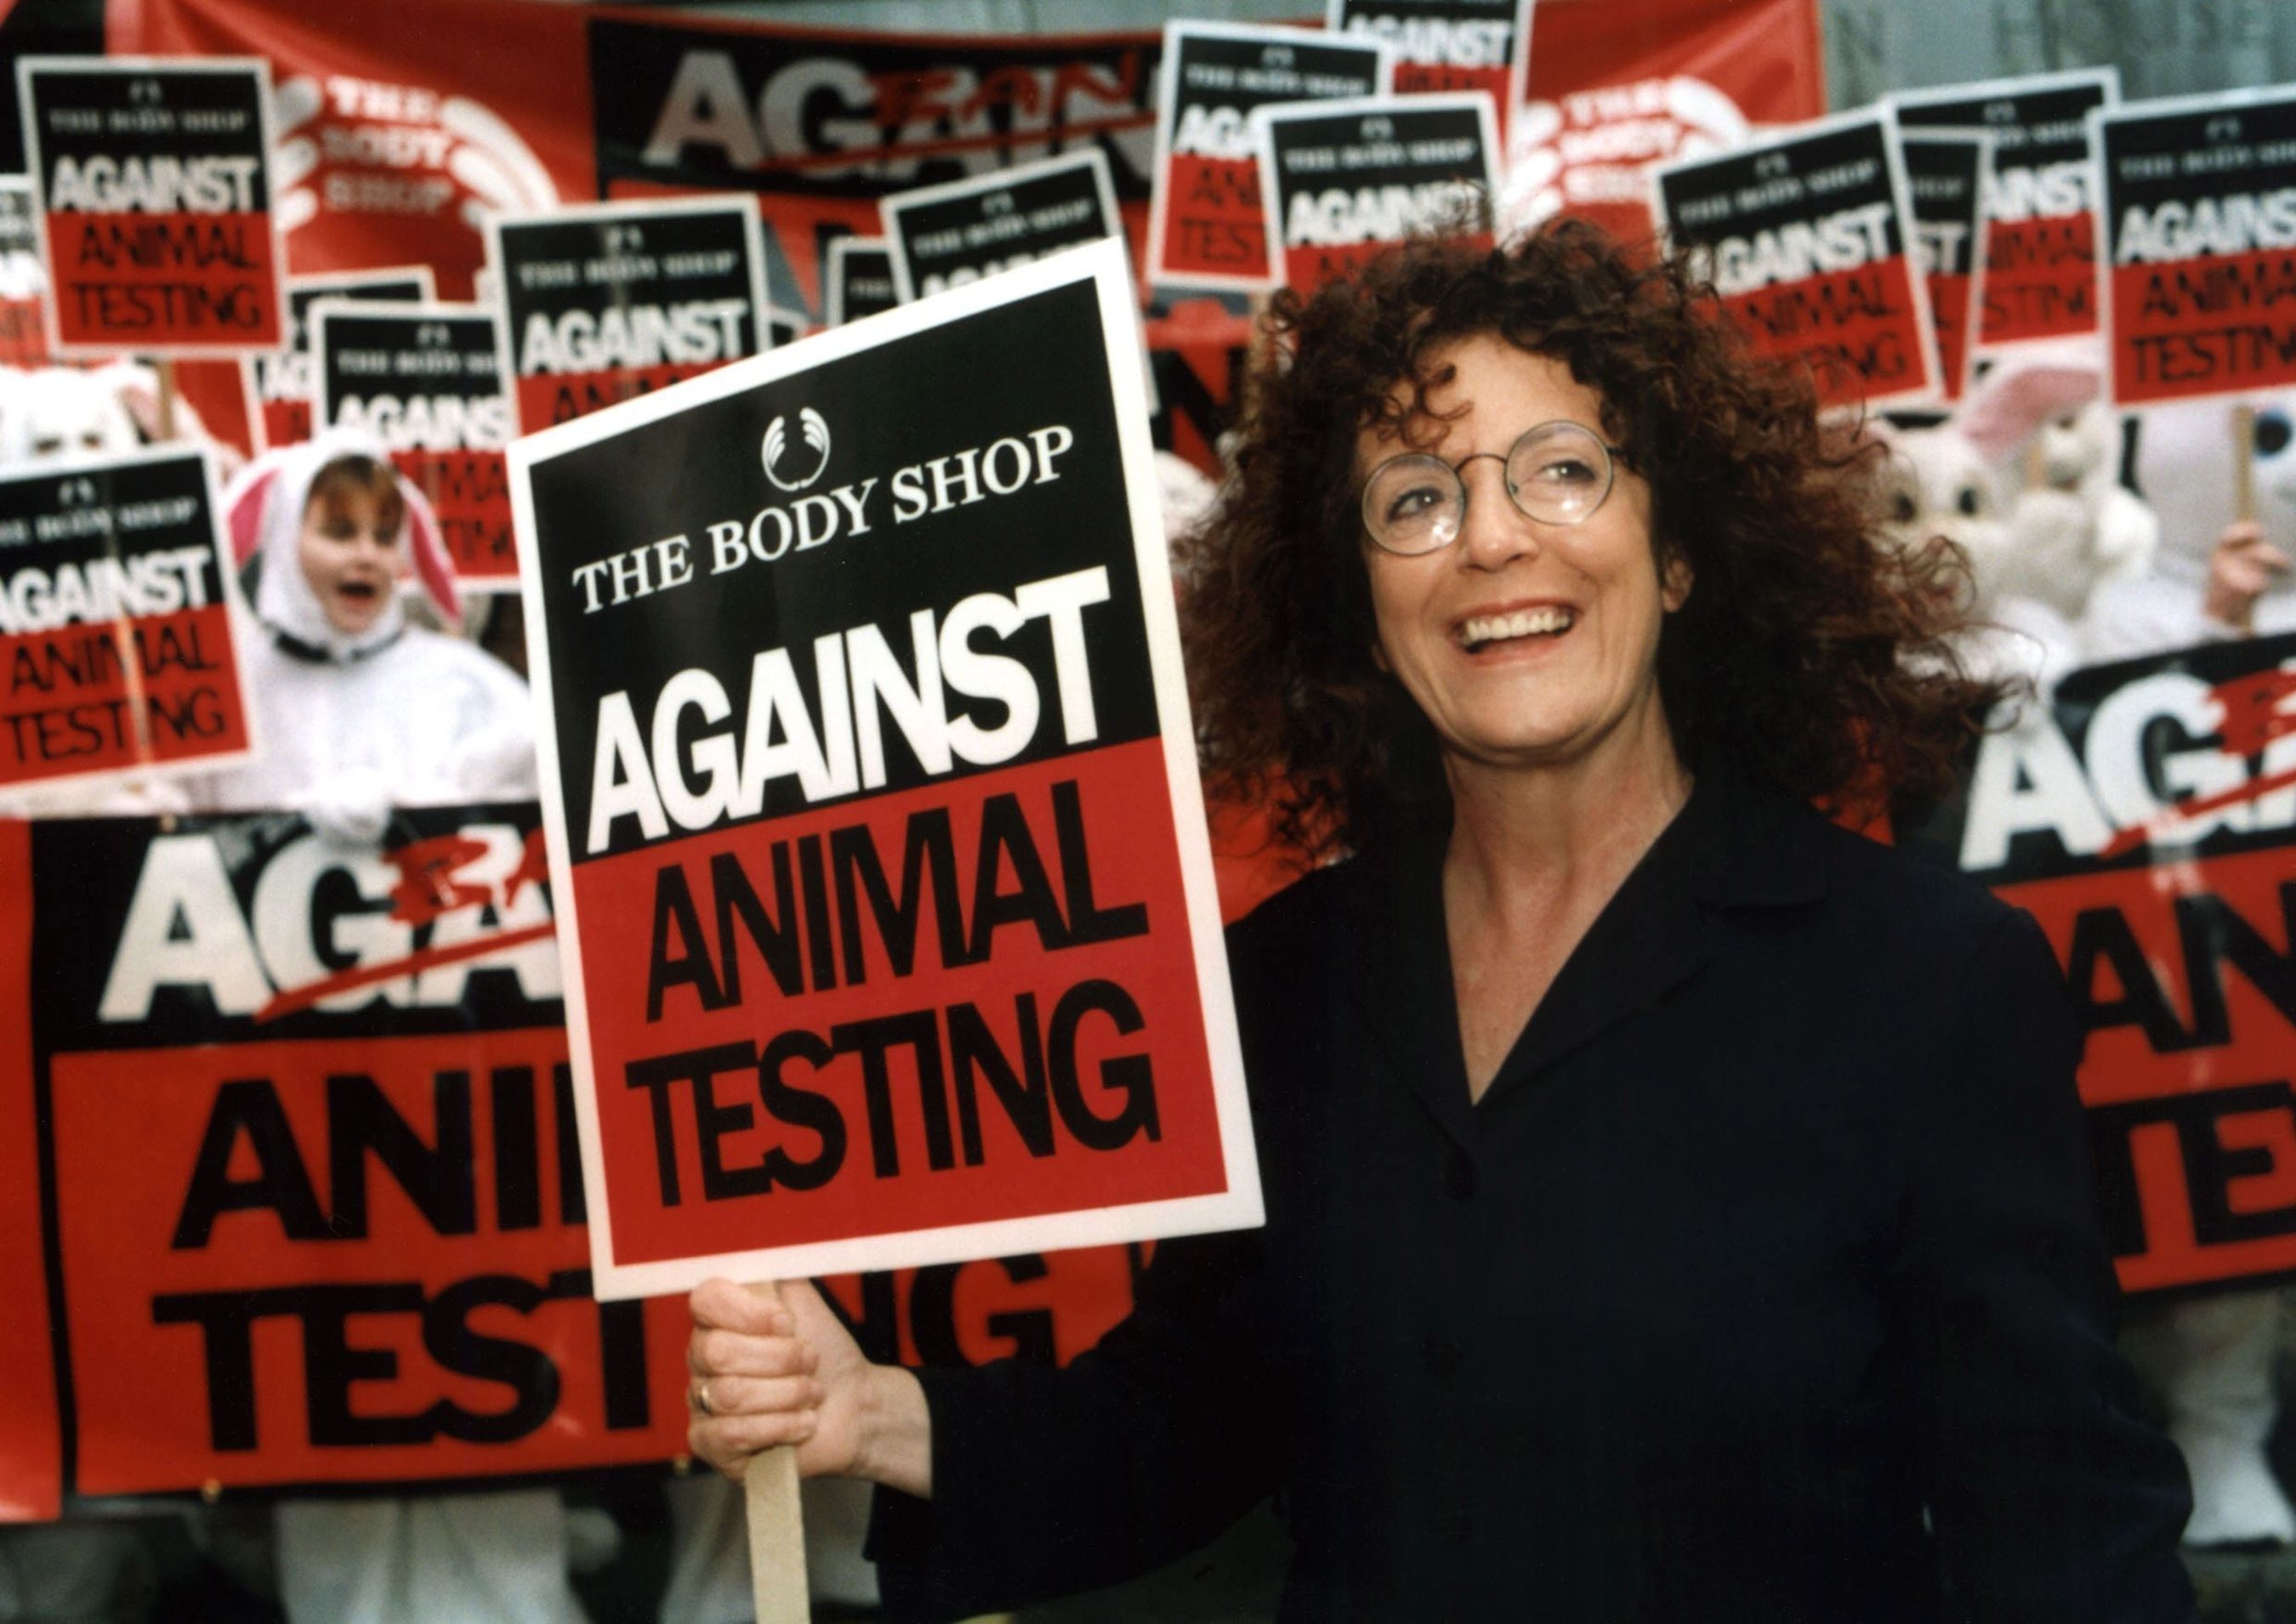 The Body Shop welcomes the news reports that The Chinese Food and Drug Administration will adopt a new approach to animal testing for cosmetic products. The Body Shop was the first and most long-standing cosmetics company to take action on the issue of animal testing for cosmetic purposes, led by founder Dame Anita Roddick, pictured here during their original campaign in 1993. (PRNewsFoto/The Body Shop)